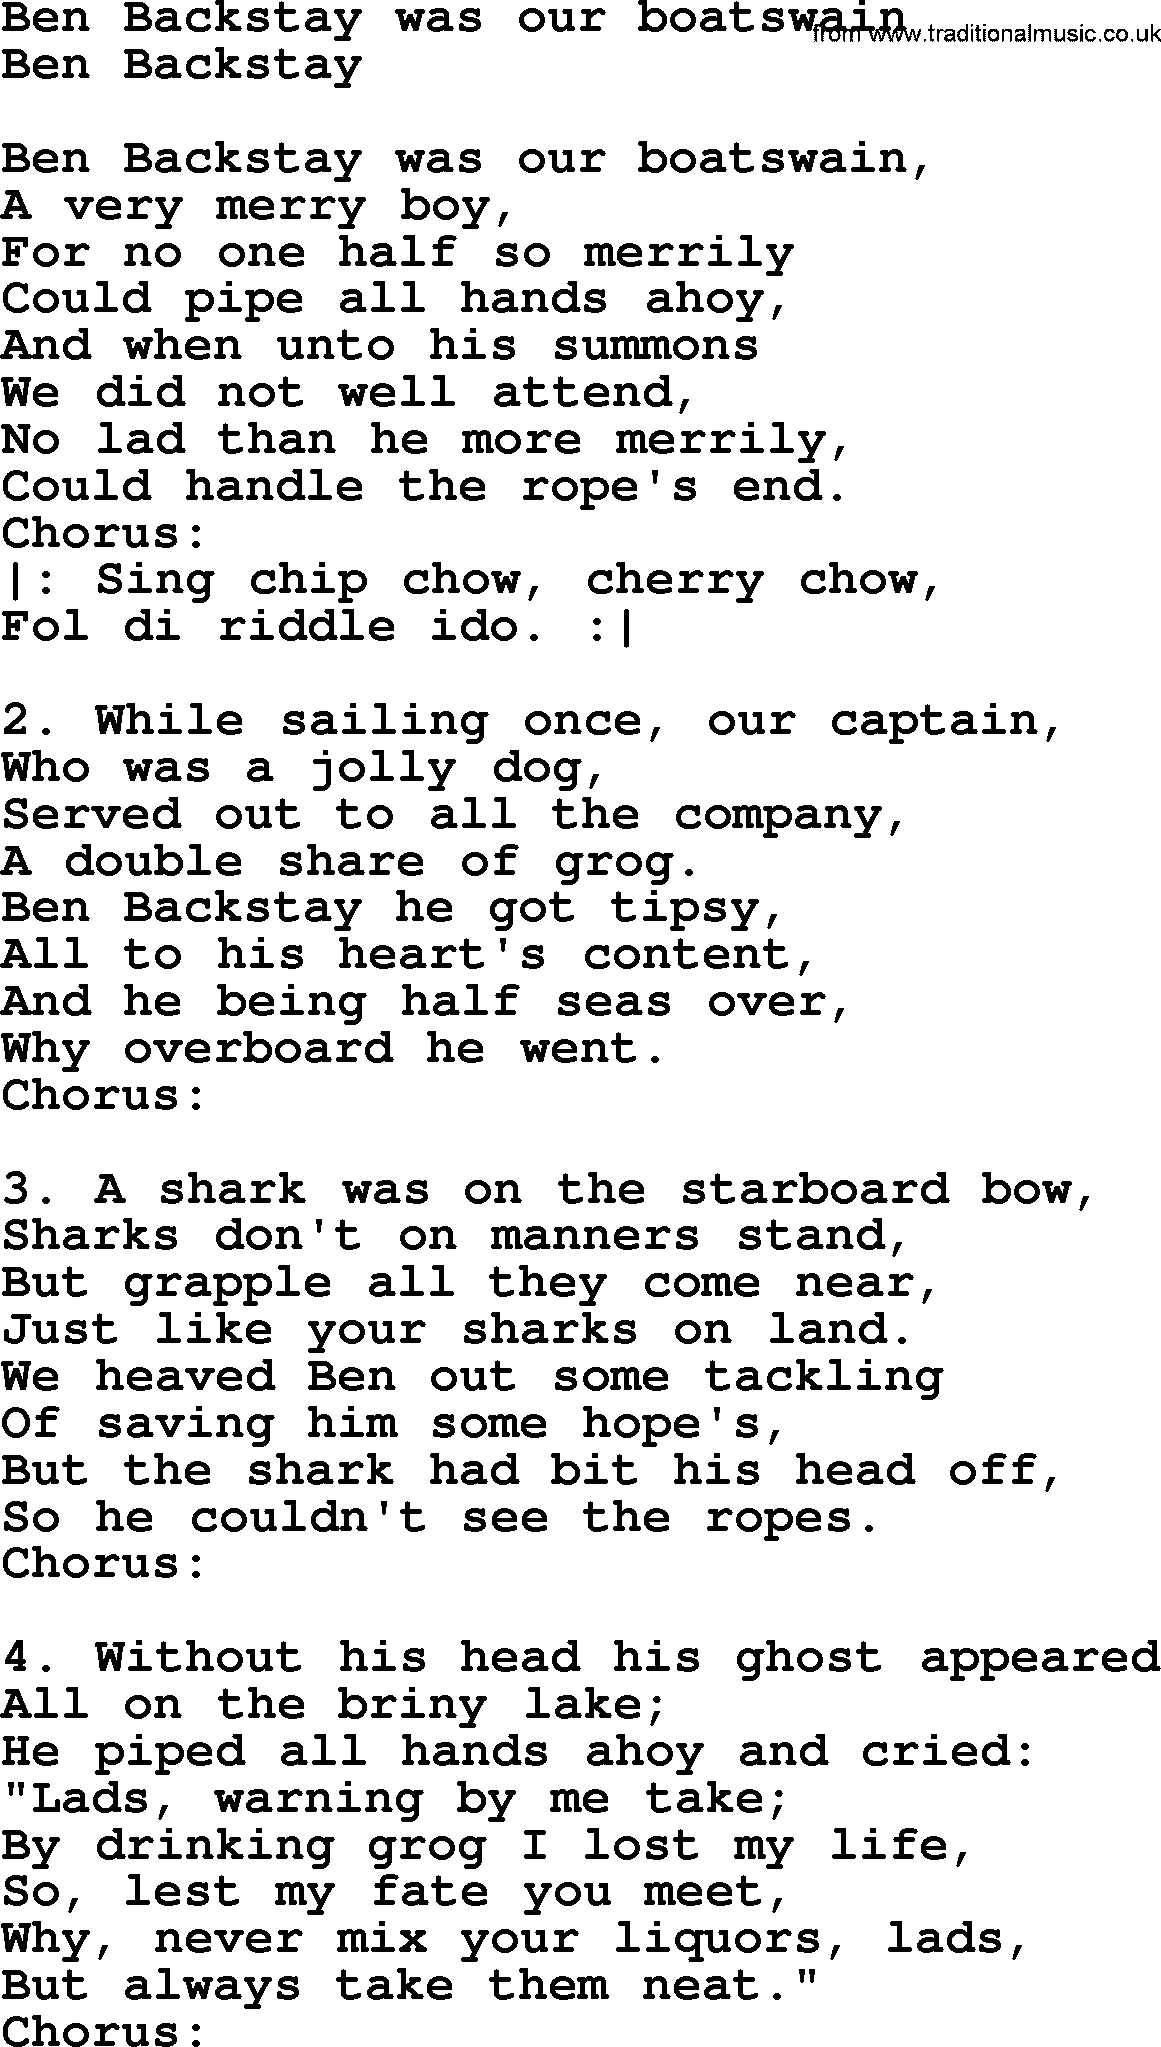 Sea Song or Shantie: Ben Backstay Was Our Boatswain, lyrics